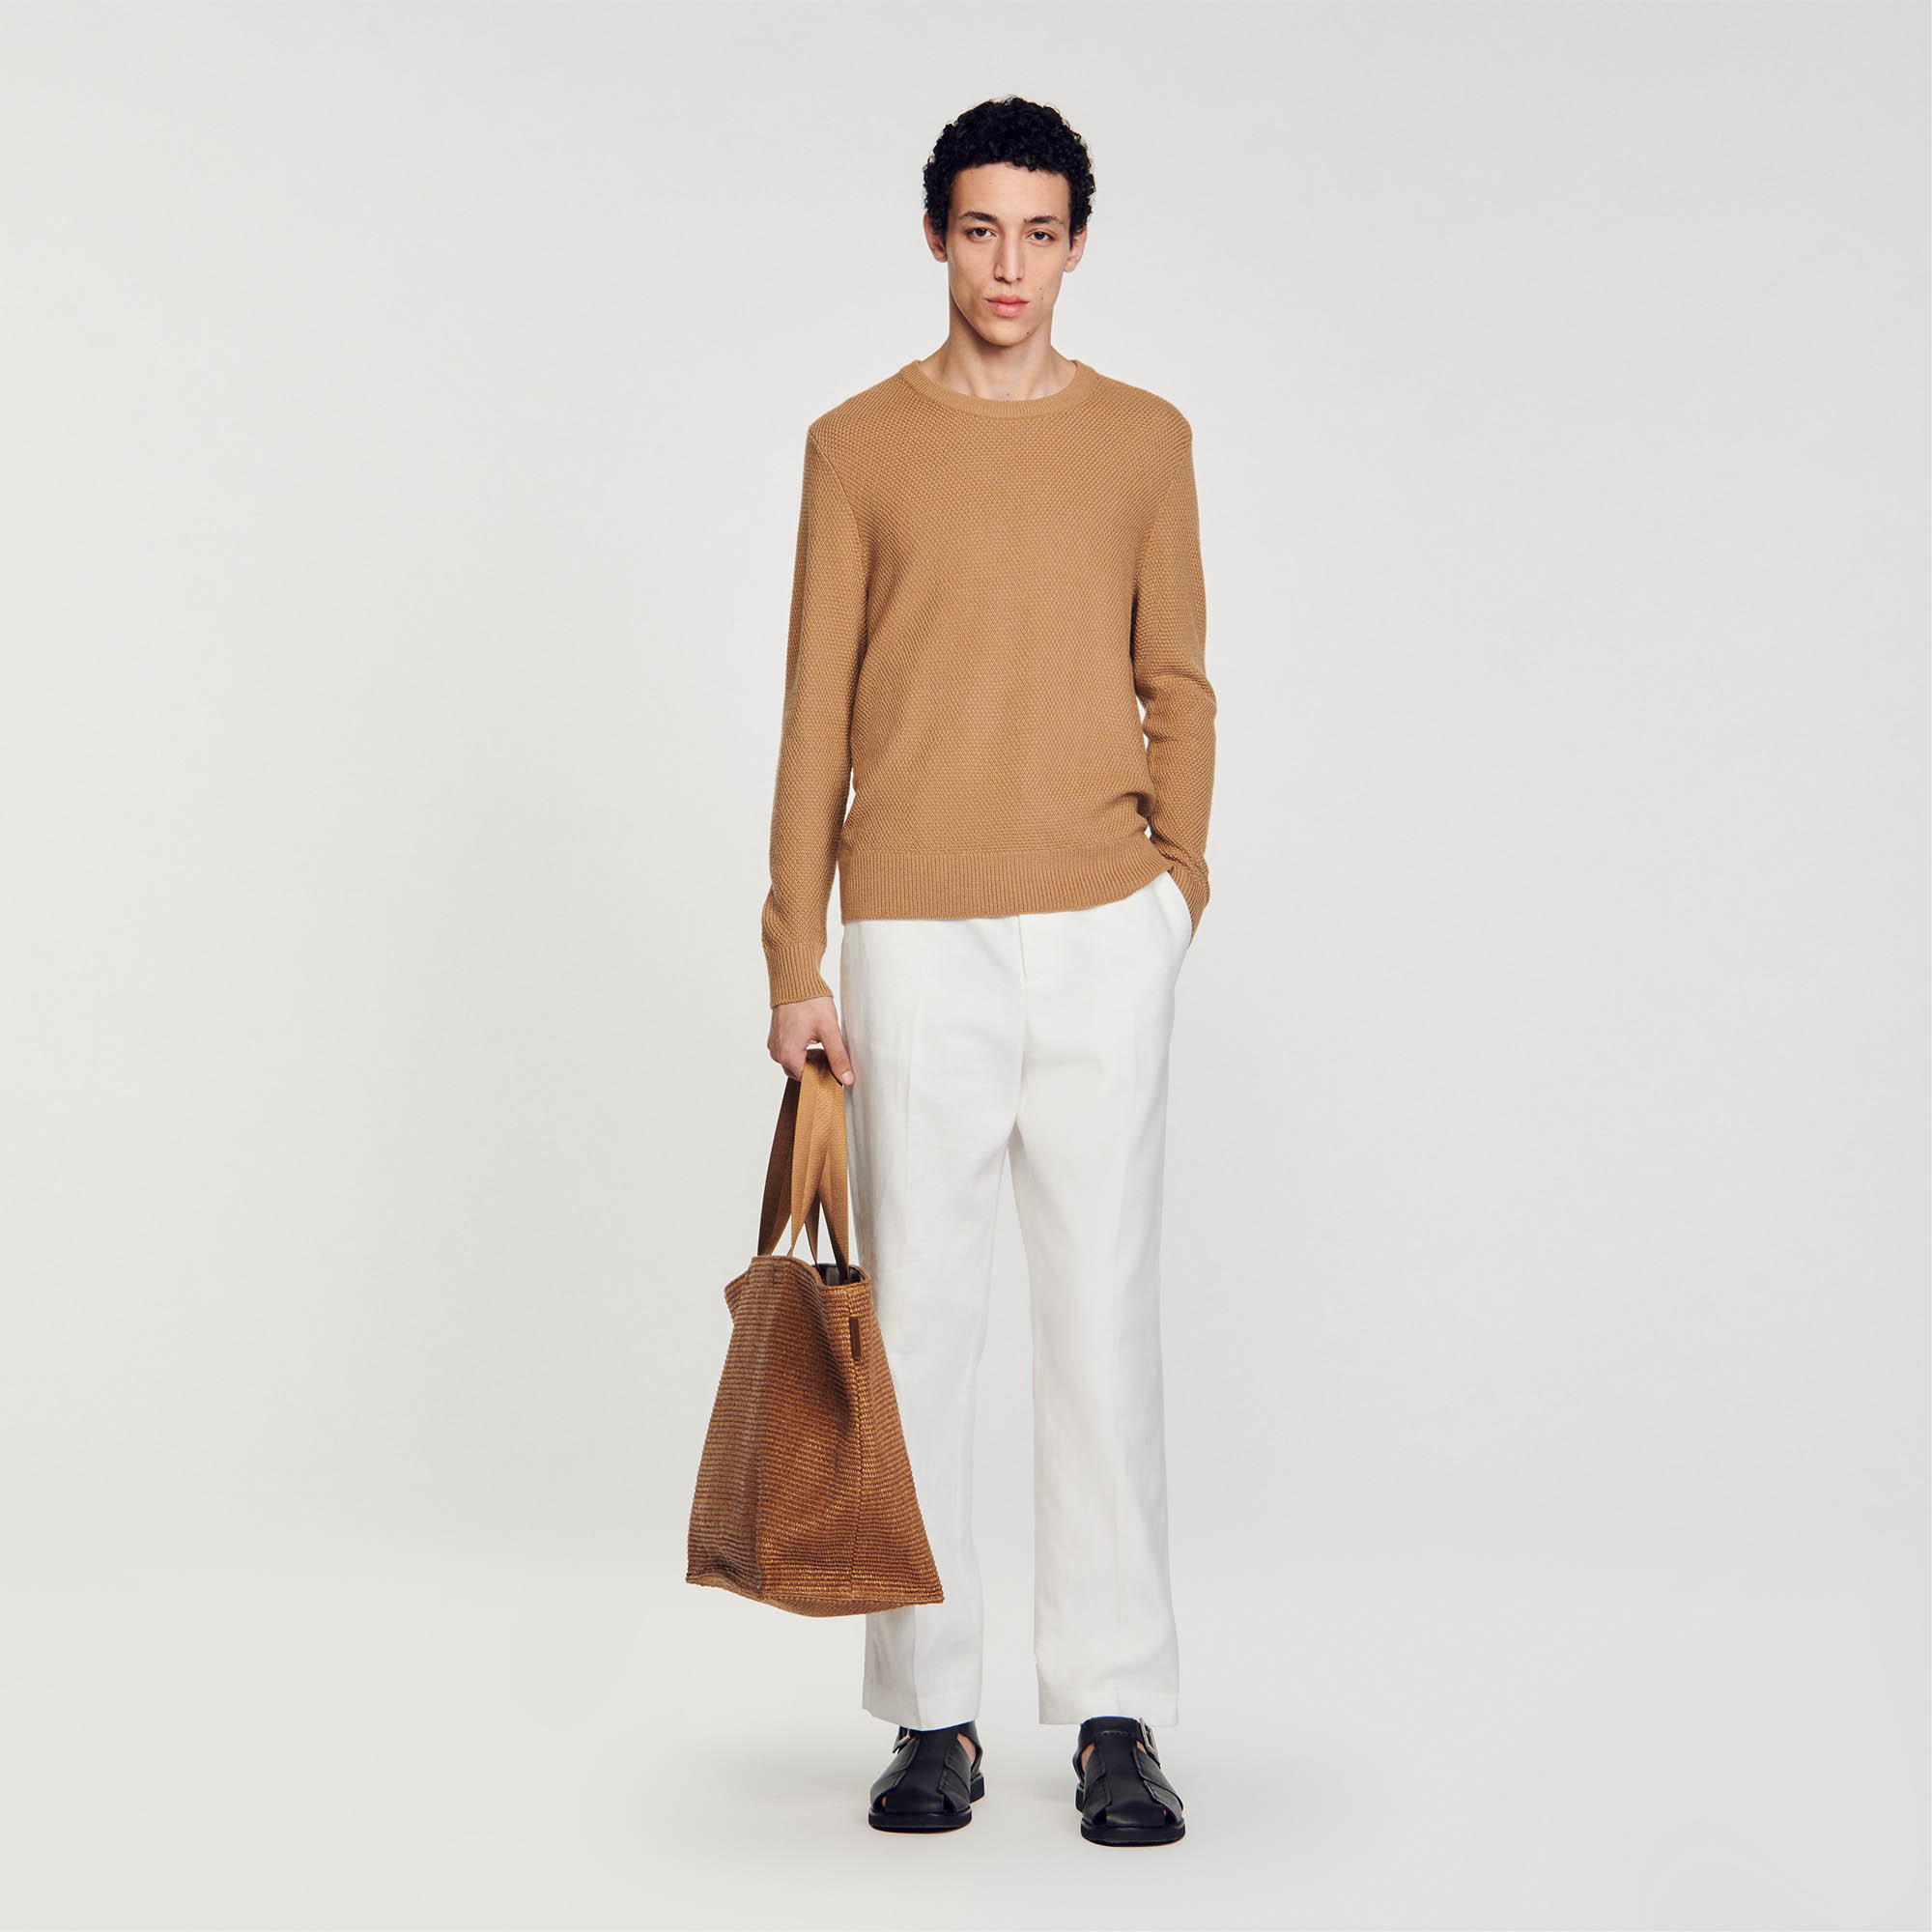 Sandro wool Sandro men's sweater â€¢ Fancy stitch knitted sweater â€¢ Rounded neckline â€¢ Ribbed trim finish â€¢ Long sleeves â€¢ The model is wearing a size S Sandro is committed to ever more responsible fashion